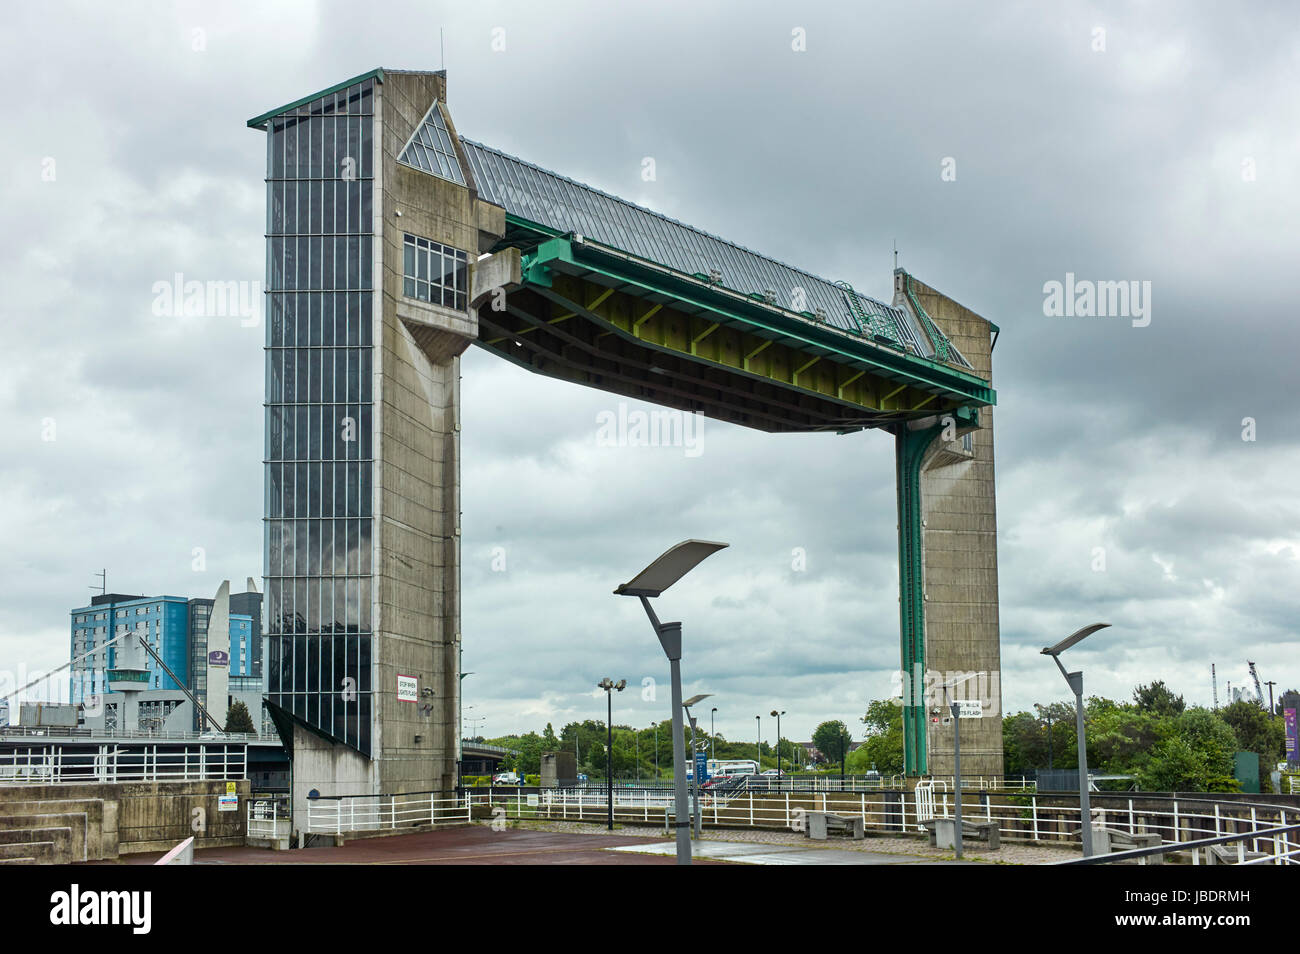 Tidal surge barrier on the river Hull Stock Photo